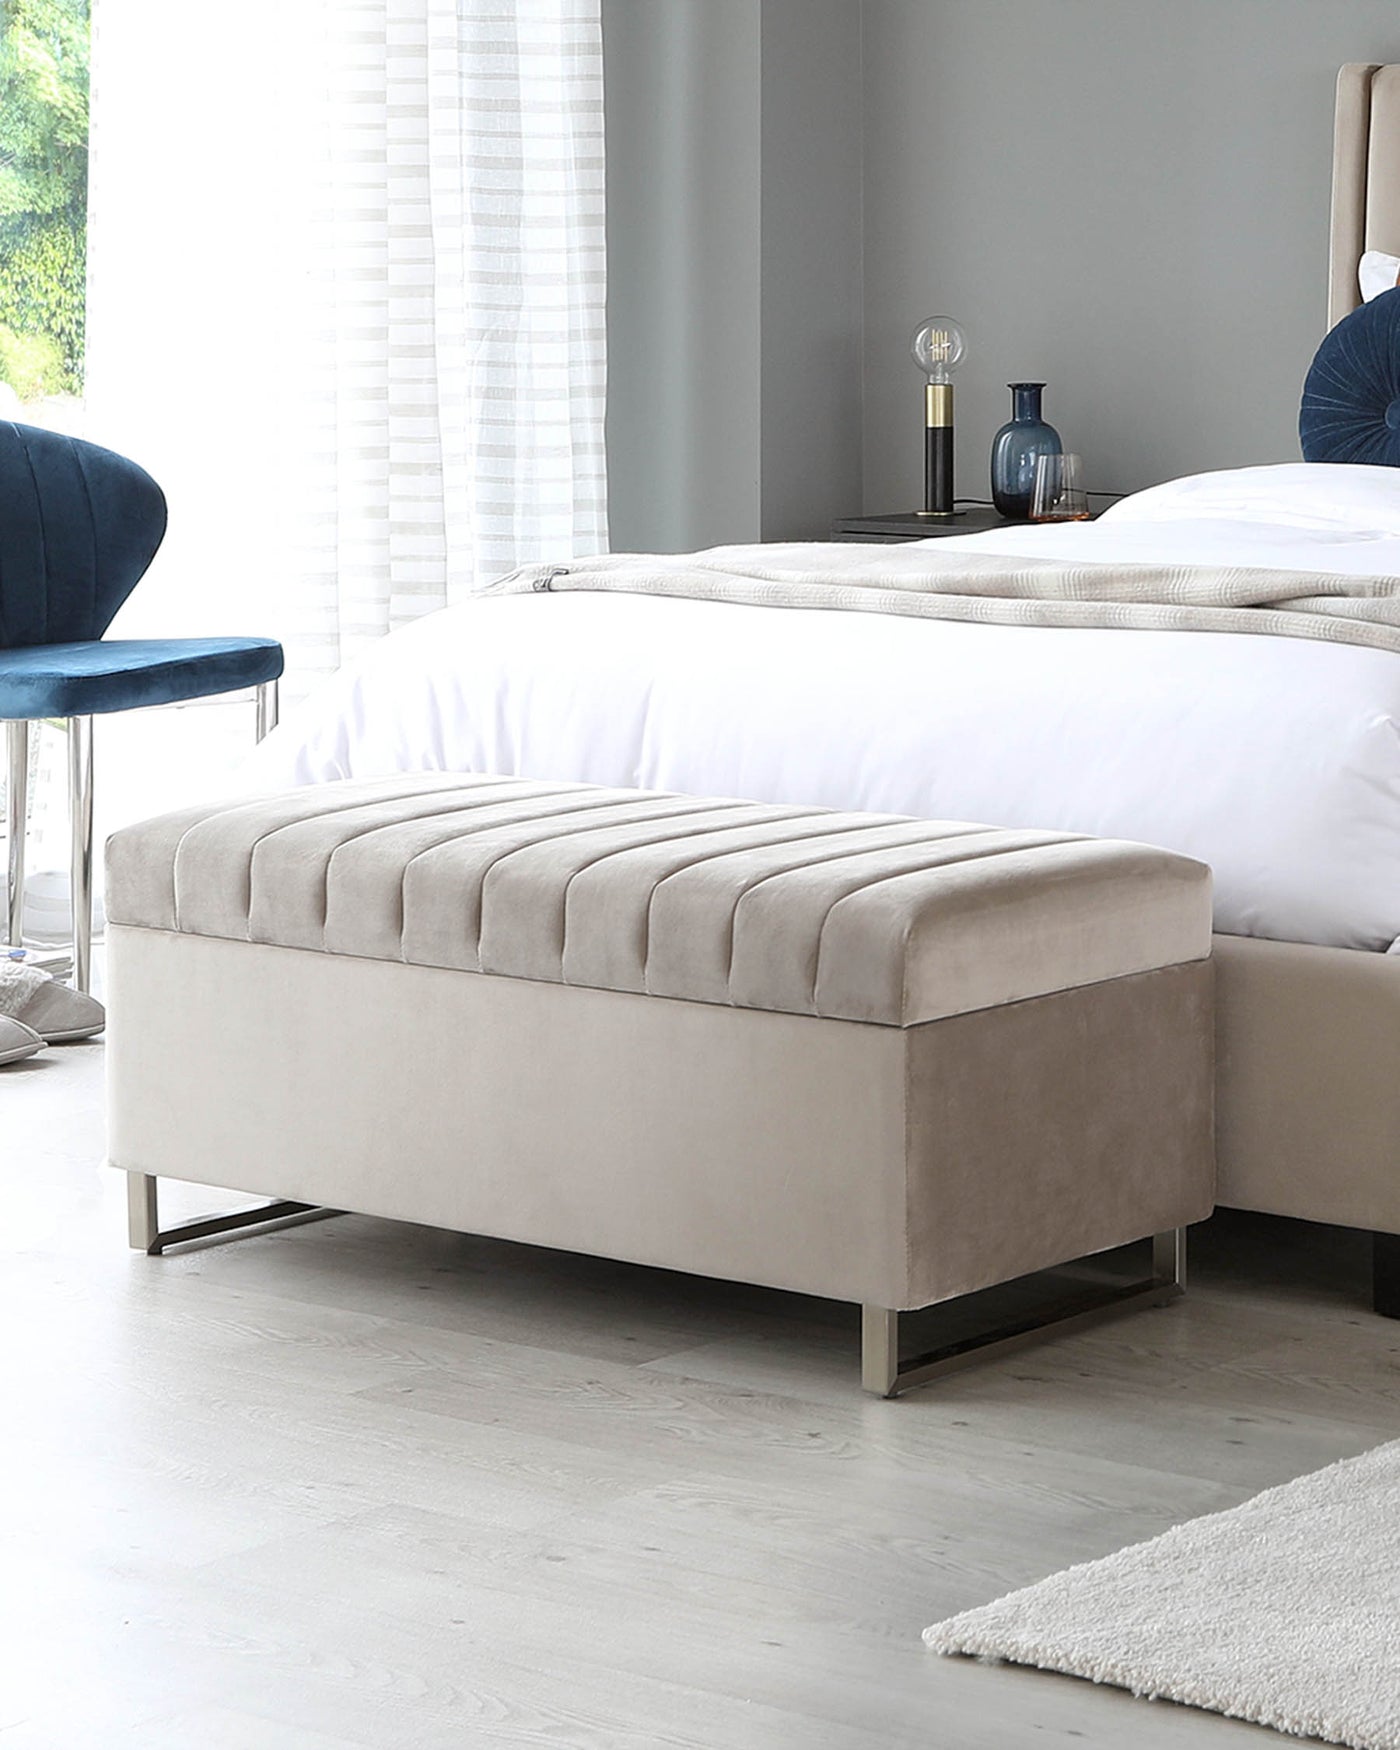 Elegant light grey upholstered bench with a plush, tufted top cushion, featuring a streamlined design and metallic legs, positioned at the foot of a bed in a modern bedroom setting.